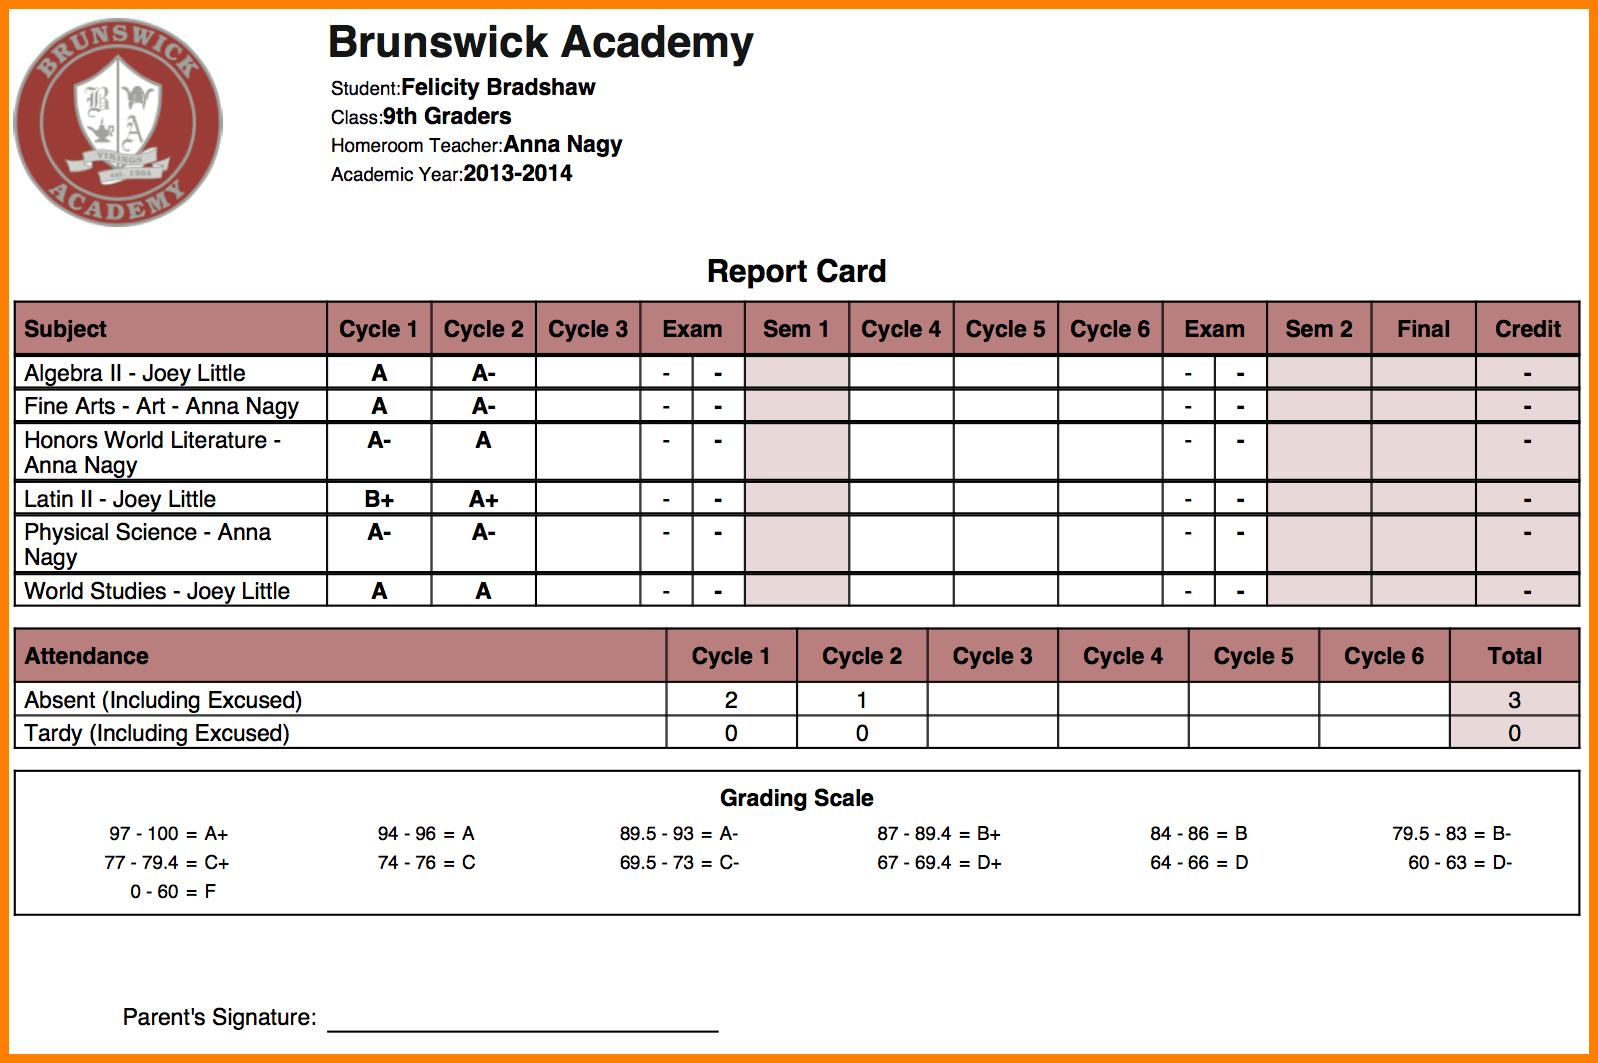 school report card format   Ecza.solinf.co